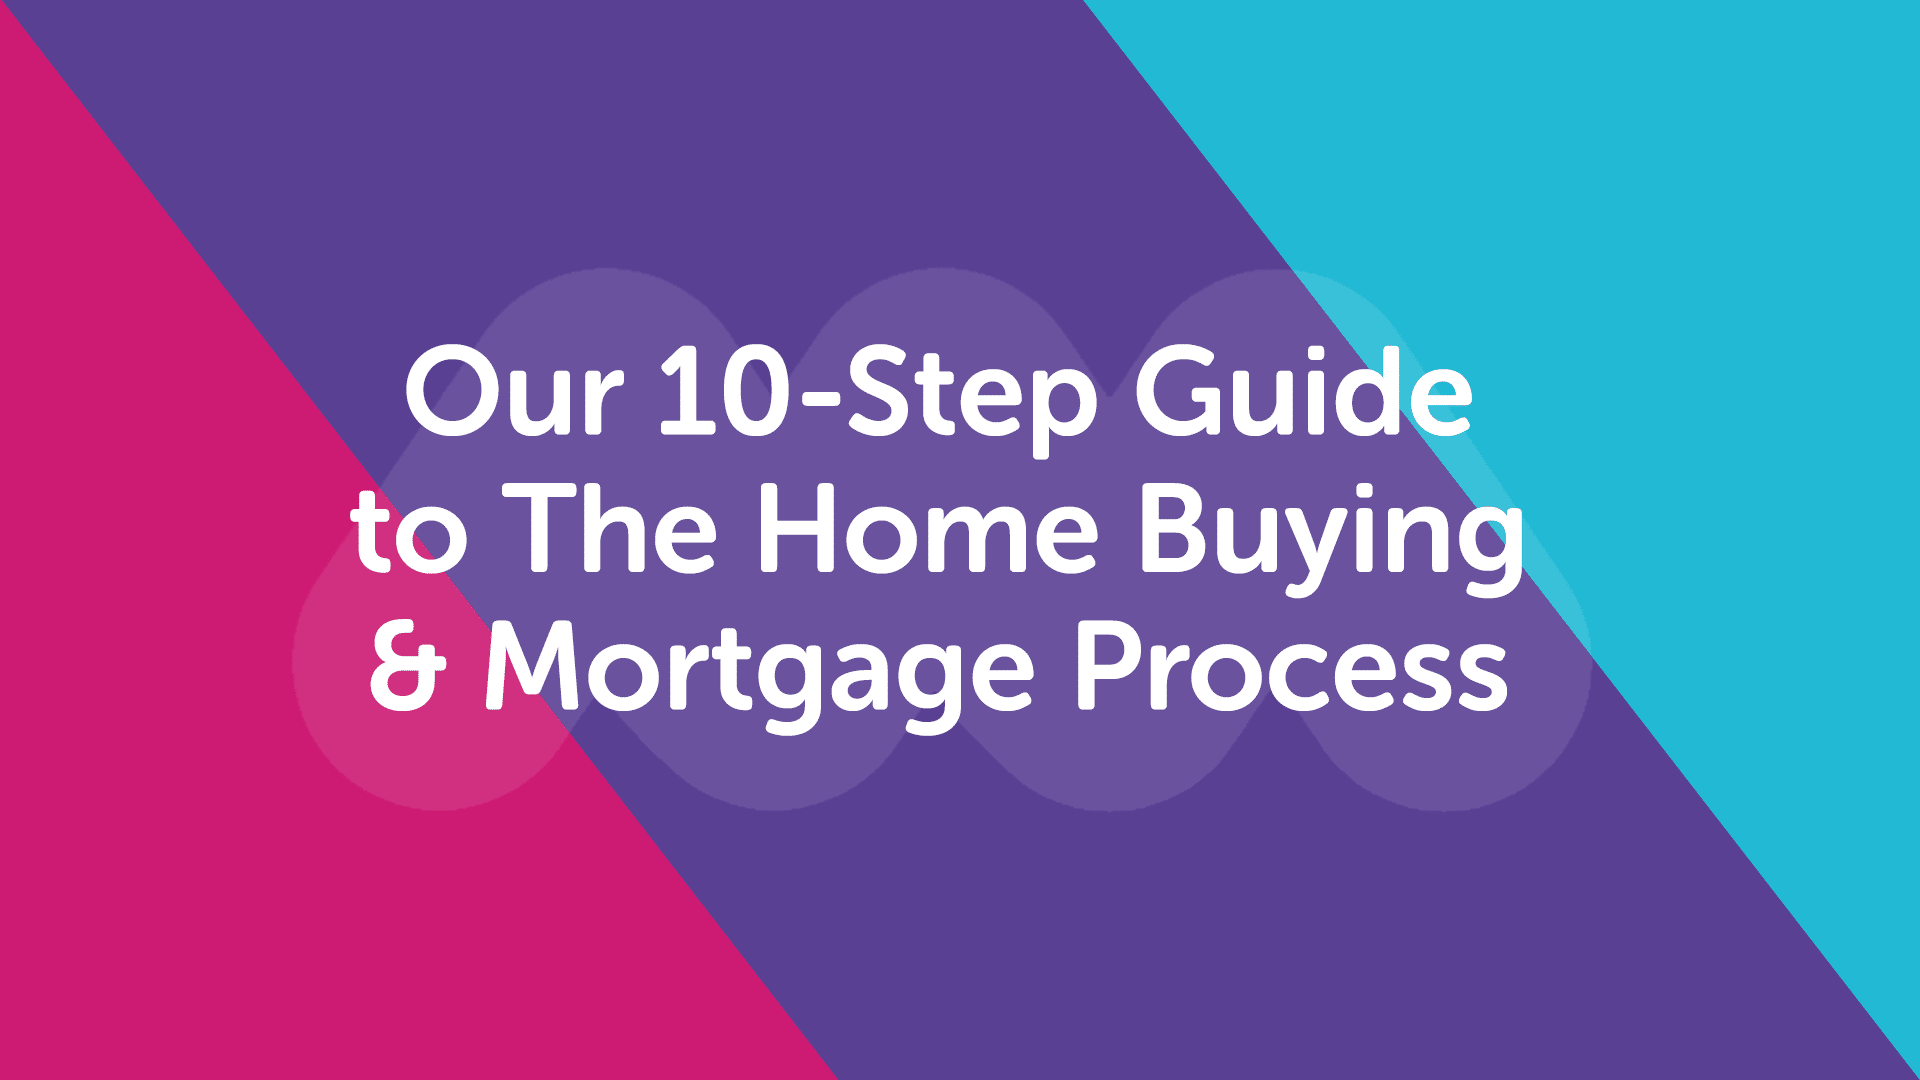 Our 10 Step Mortgage & Home Buying Guide for First-Time Buyers